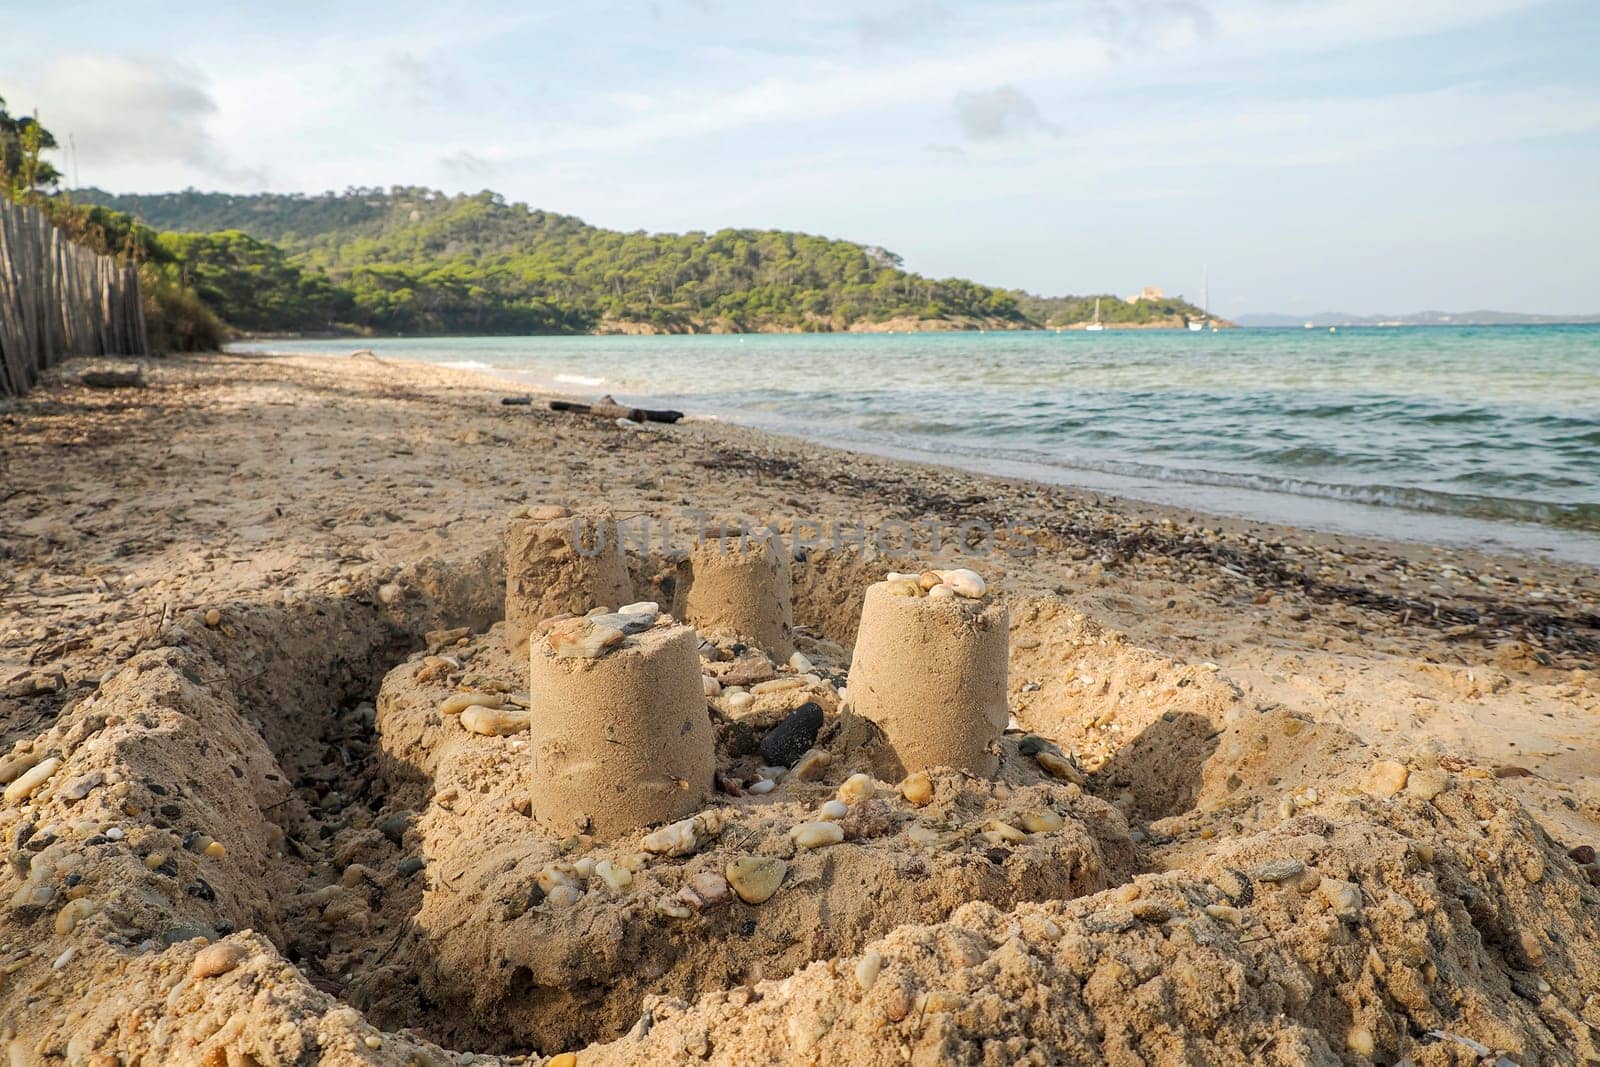 sand castle in notre dame beach in porquerolles island france panorama landscape by AndreaIzzotti